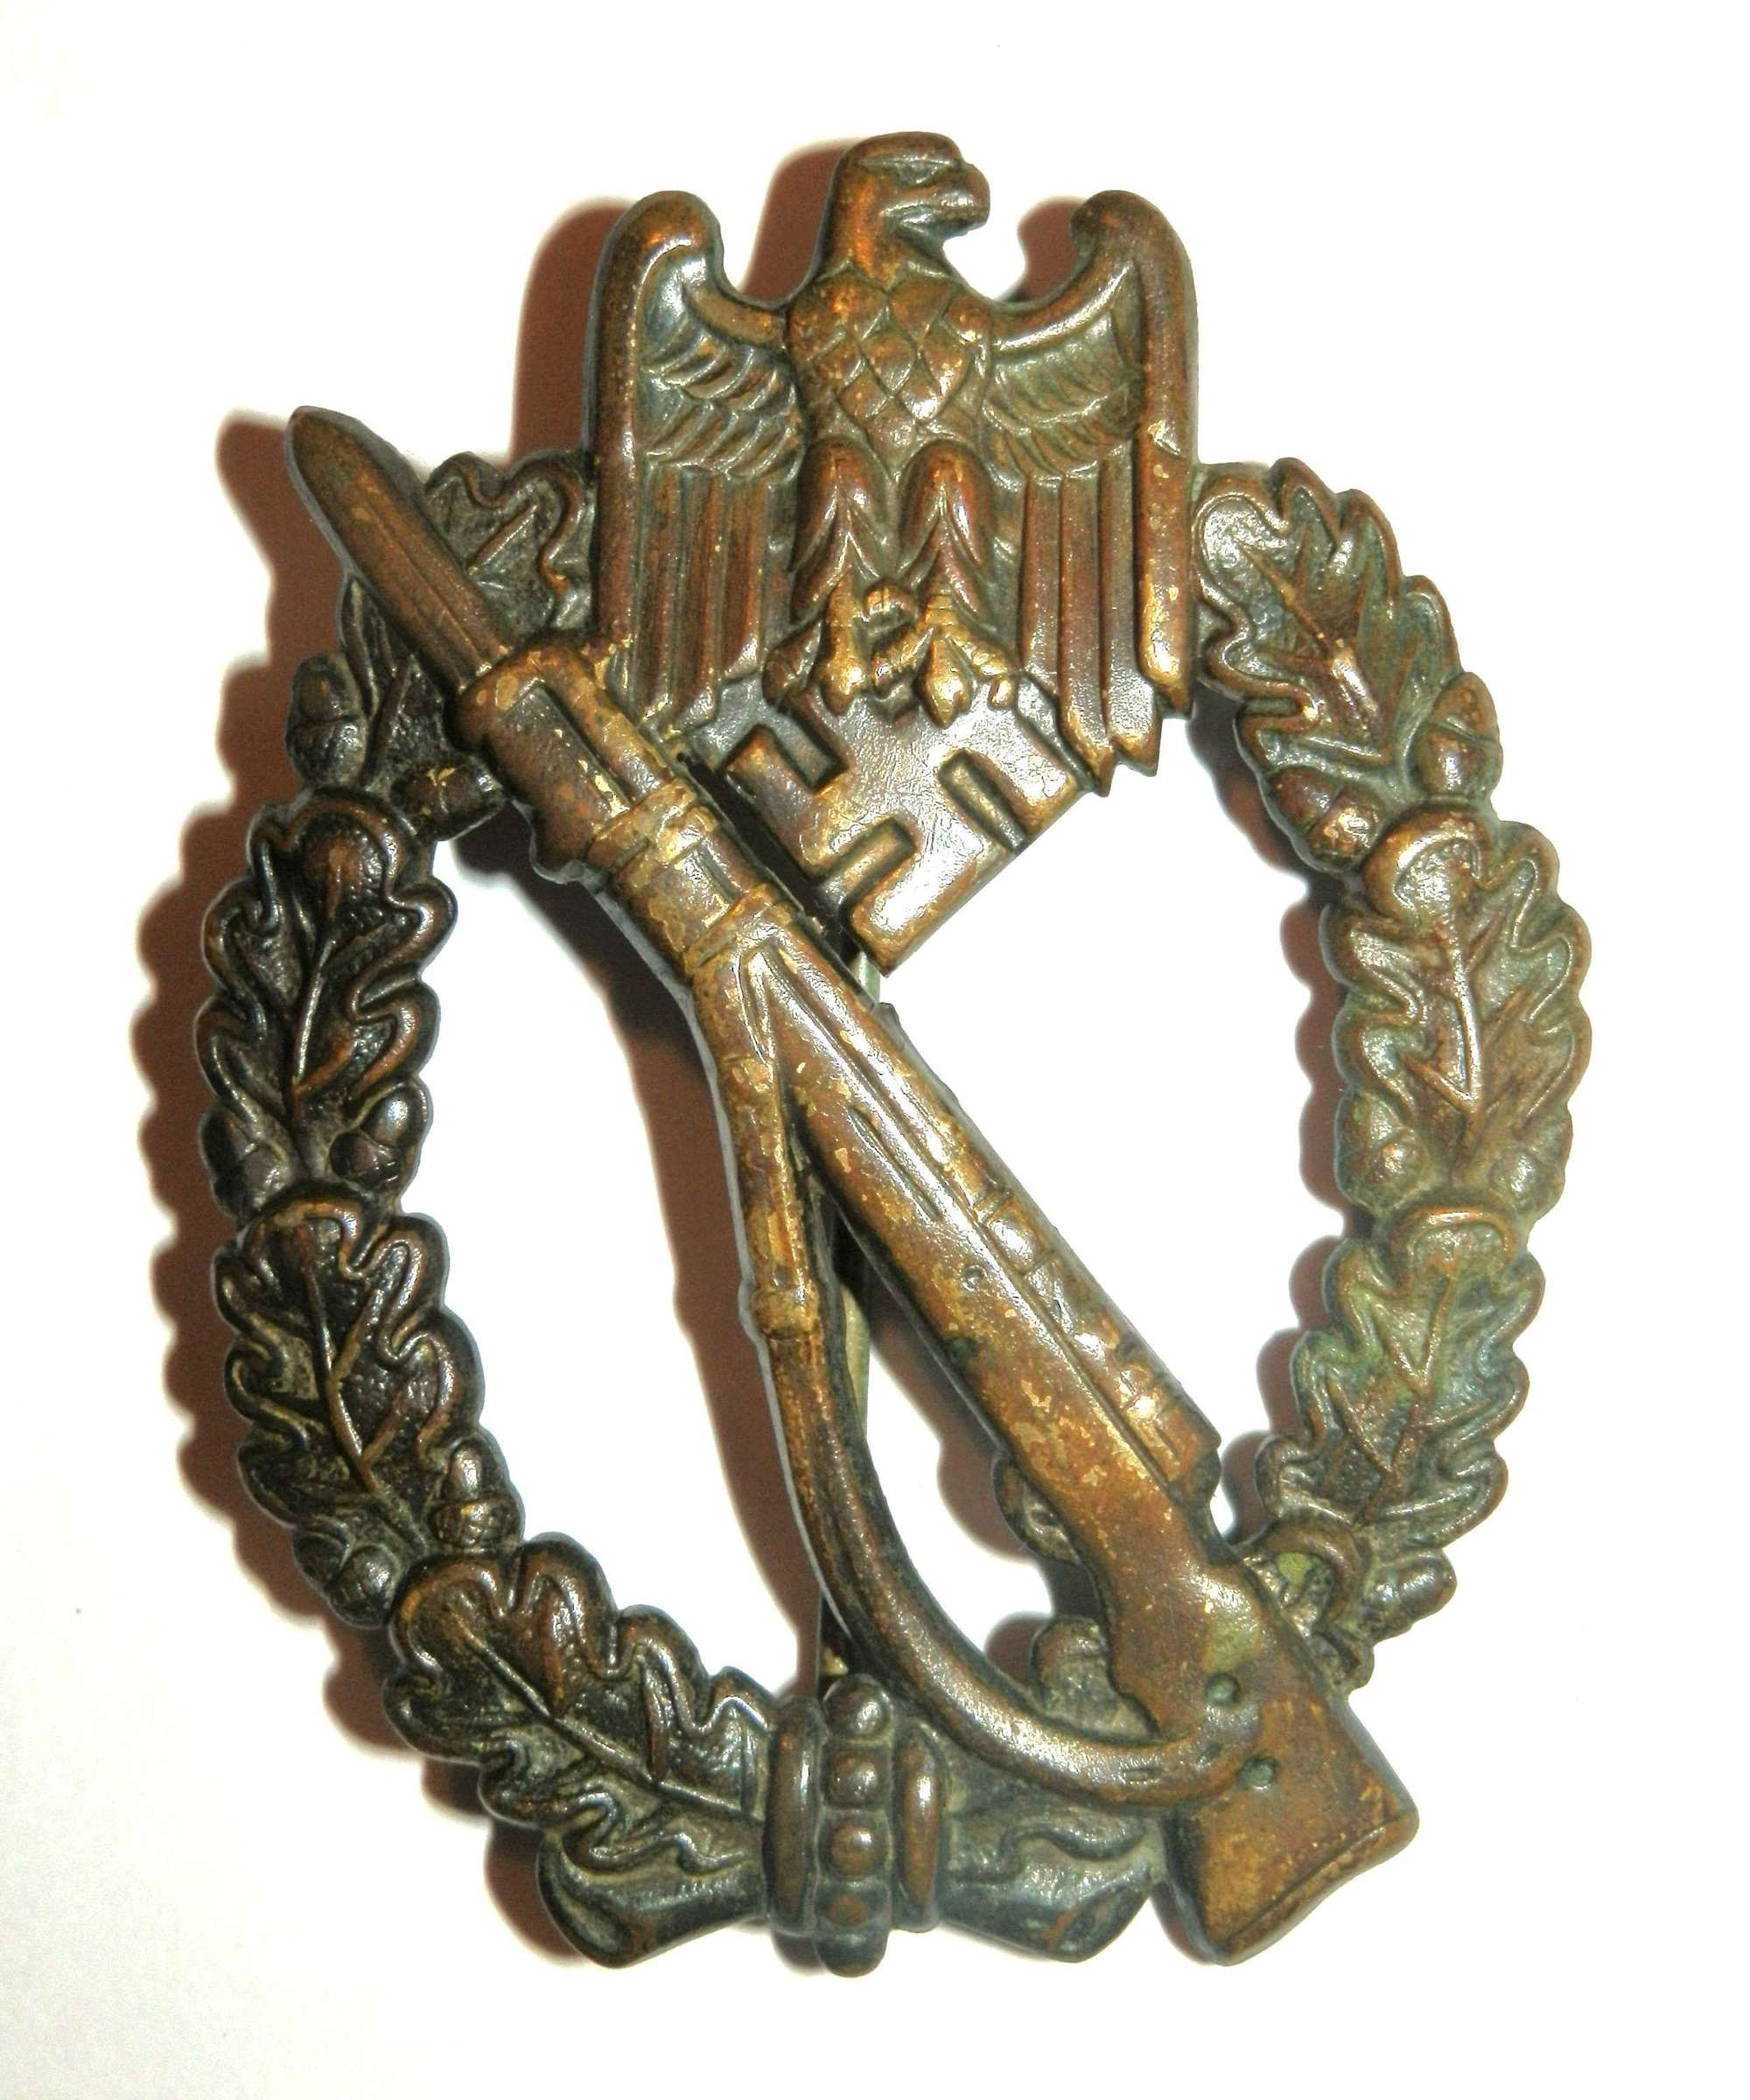 German Infantry Assault Badge. Attributed to B.H. Mayer’s.